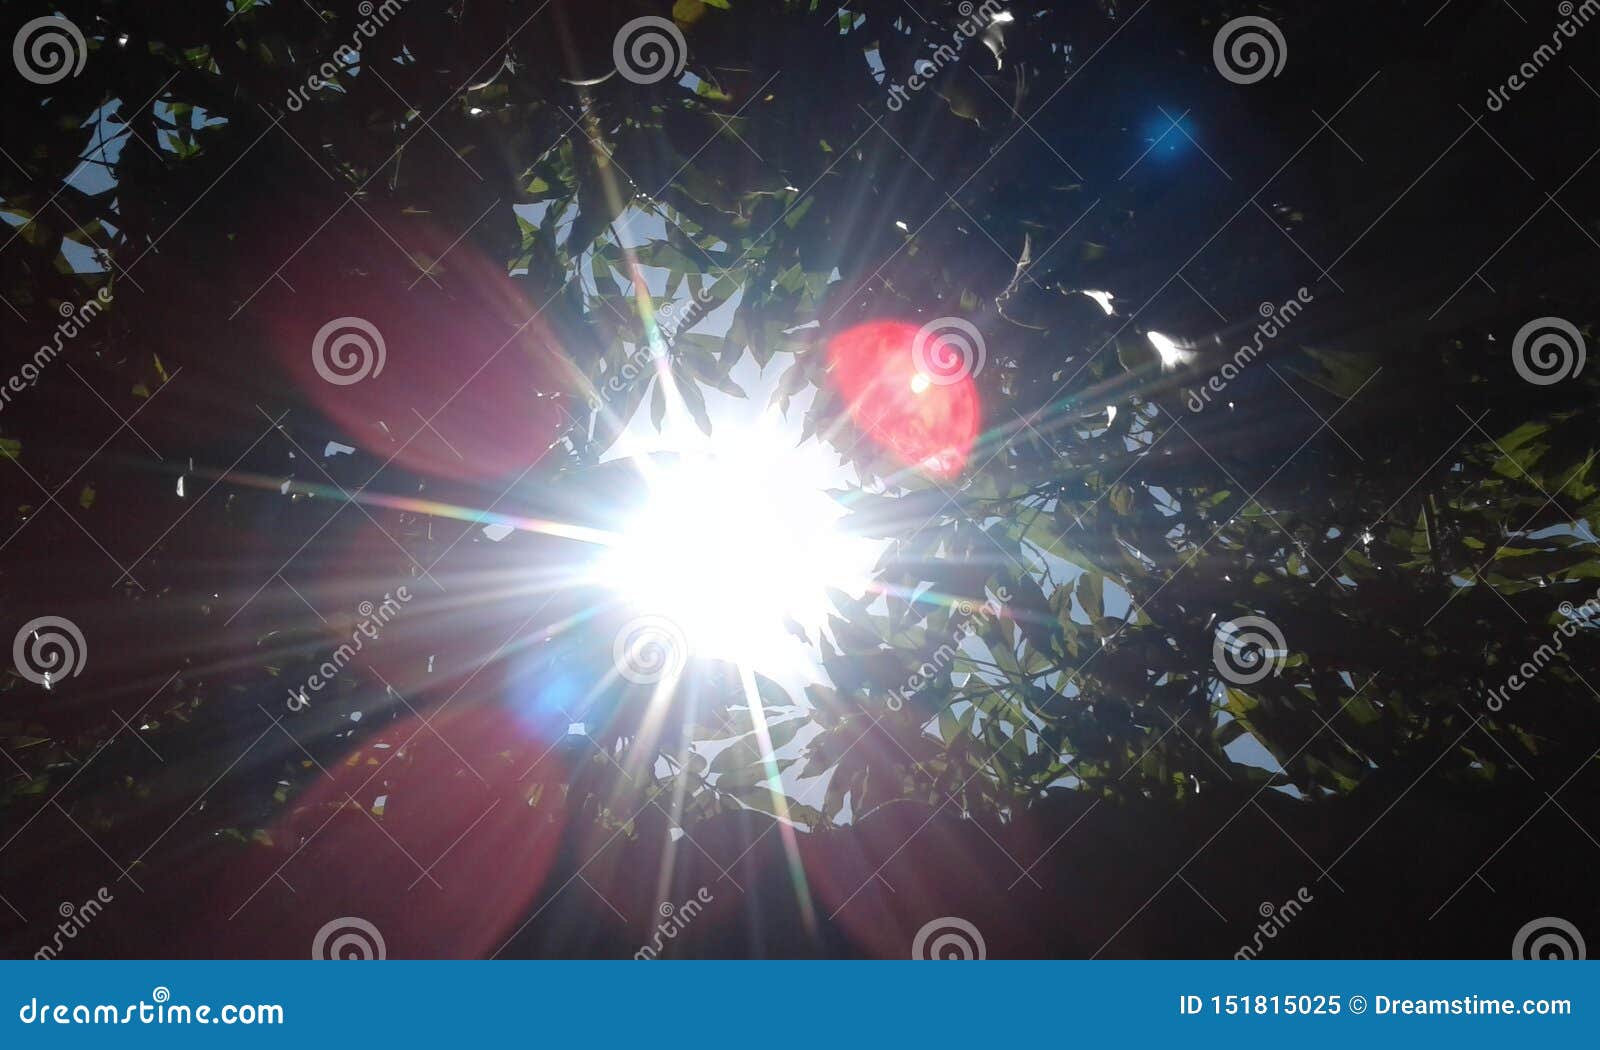 sun in the nature